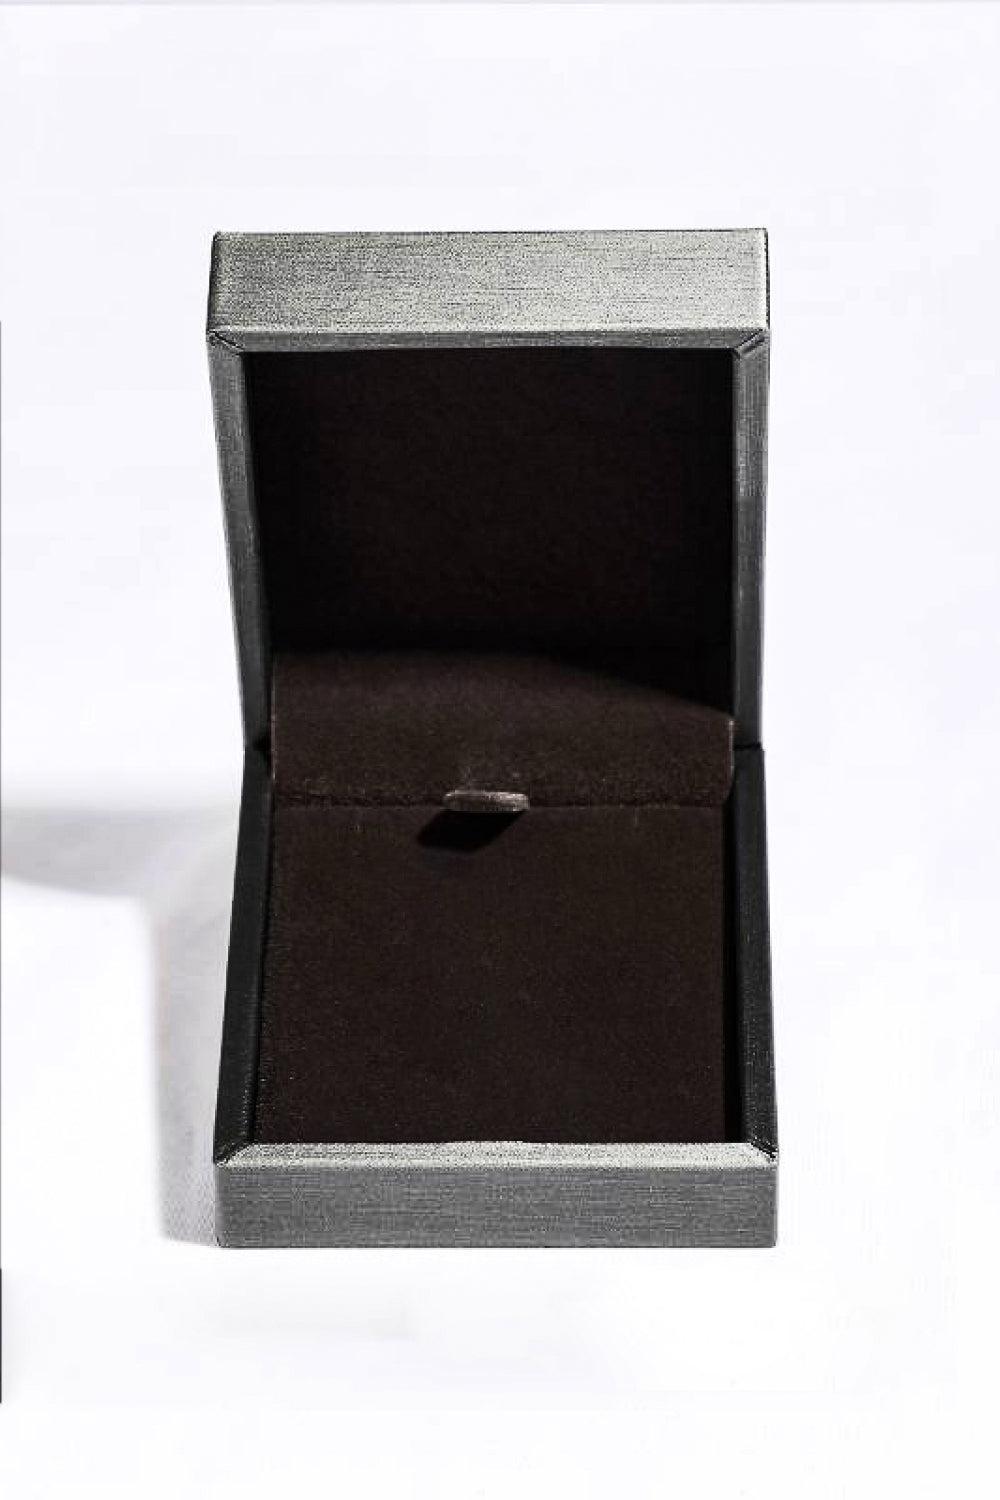 an open box with a ring inside of it